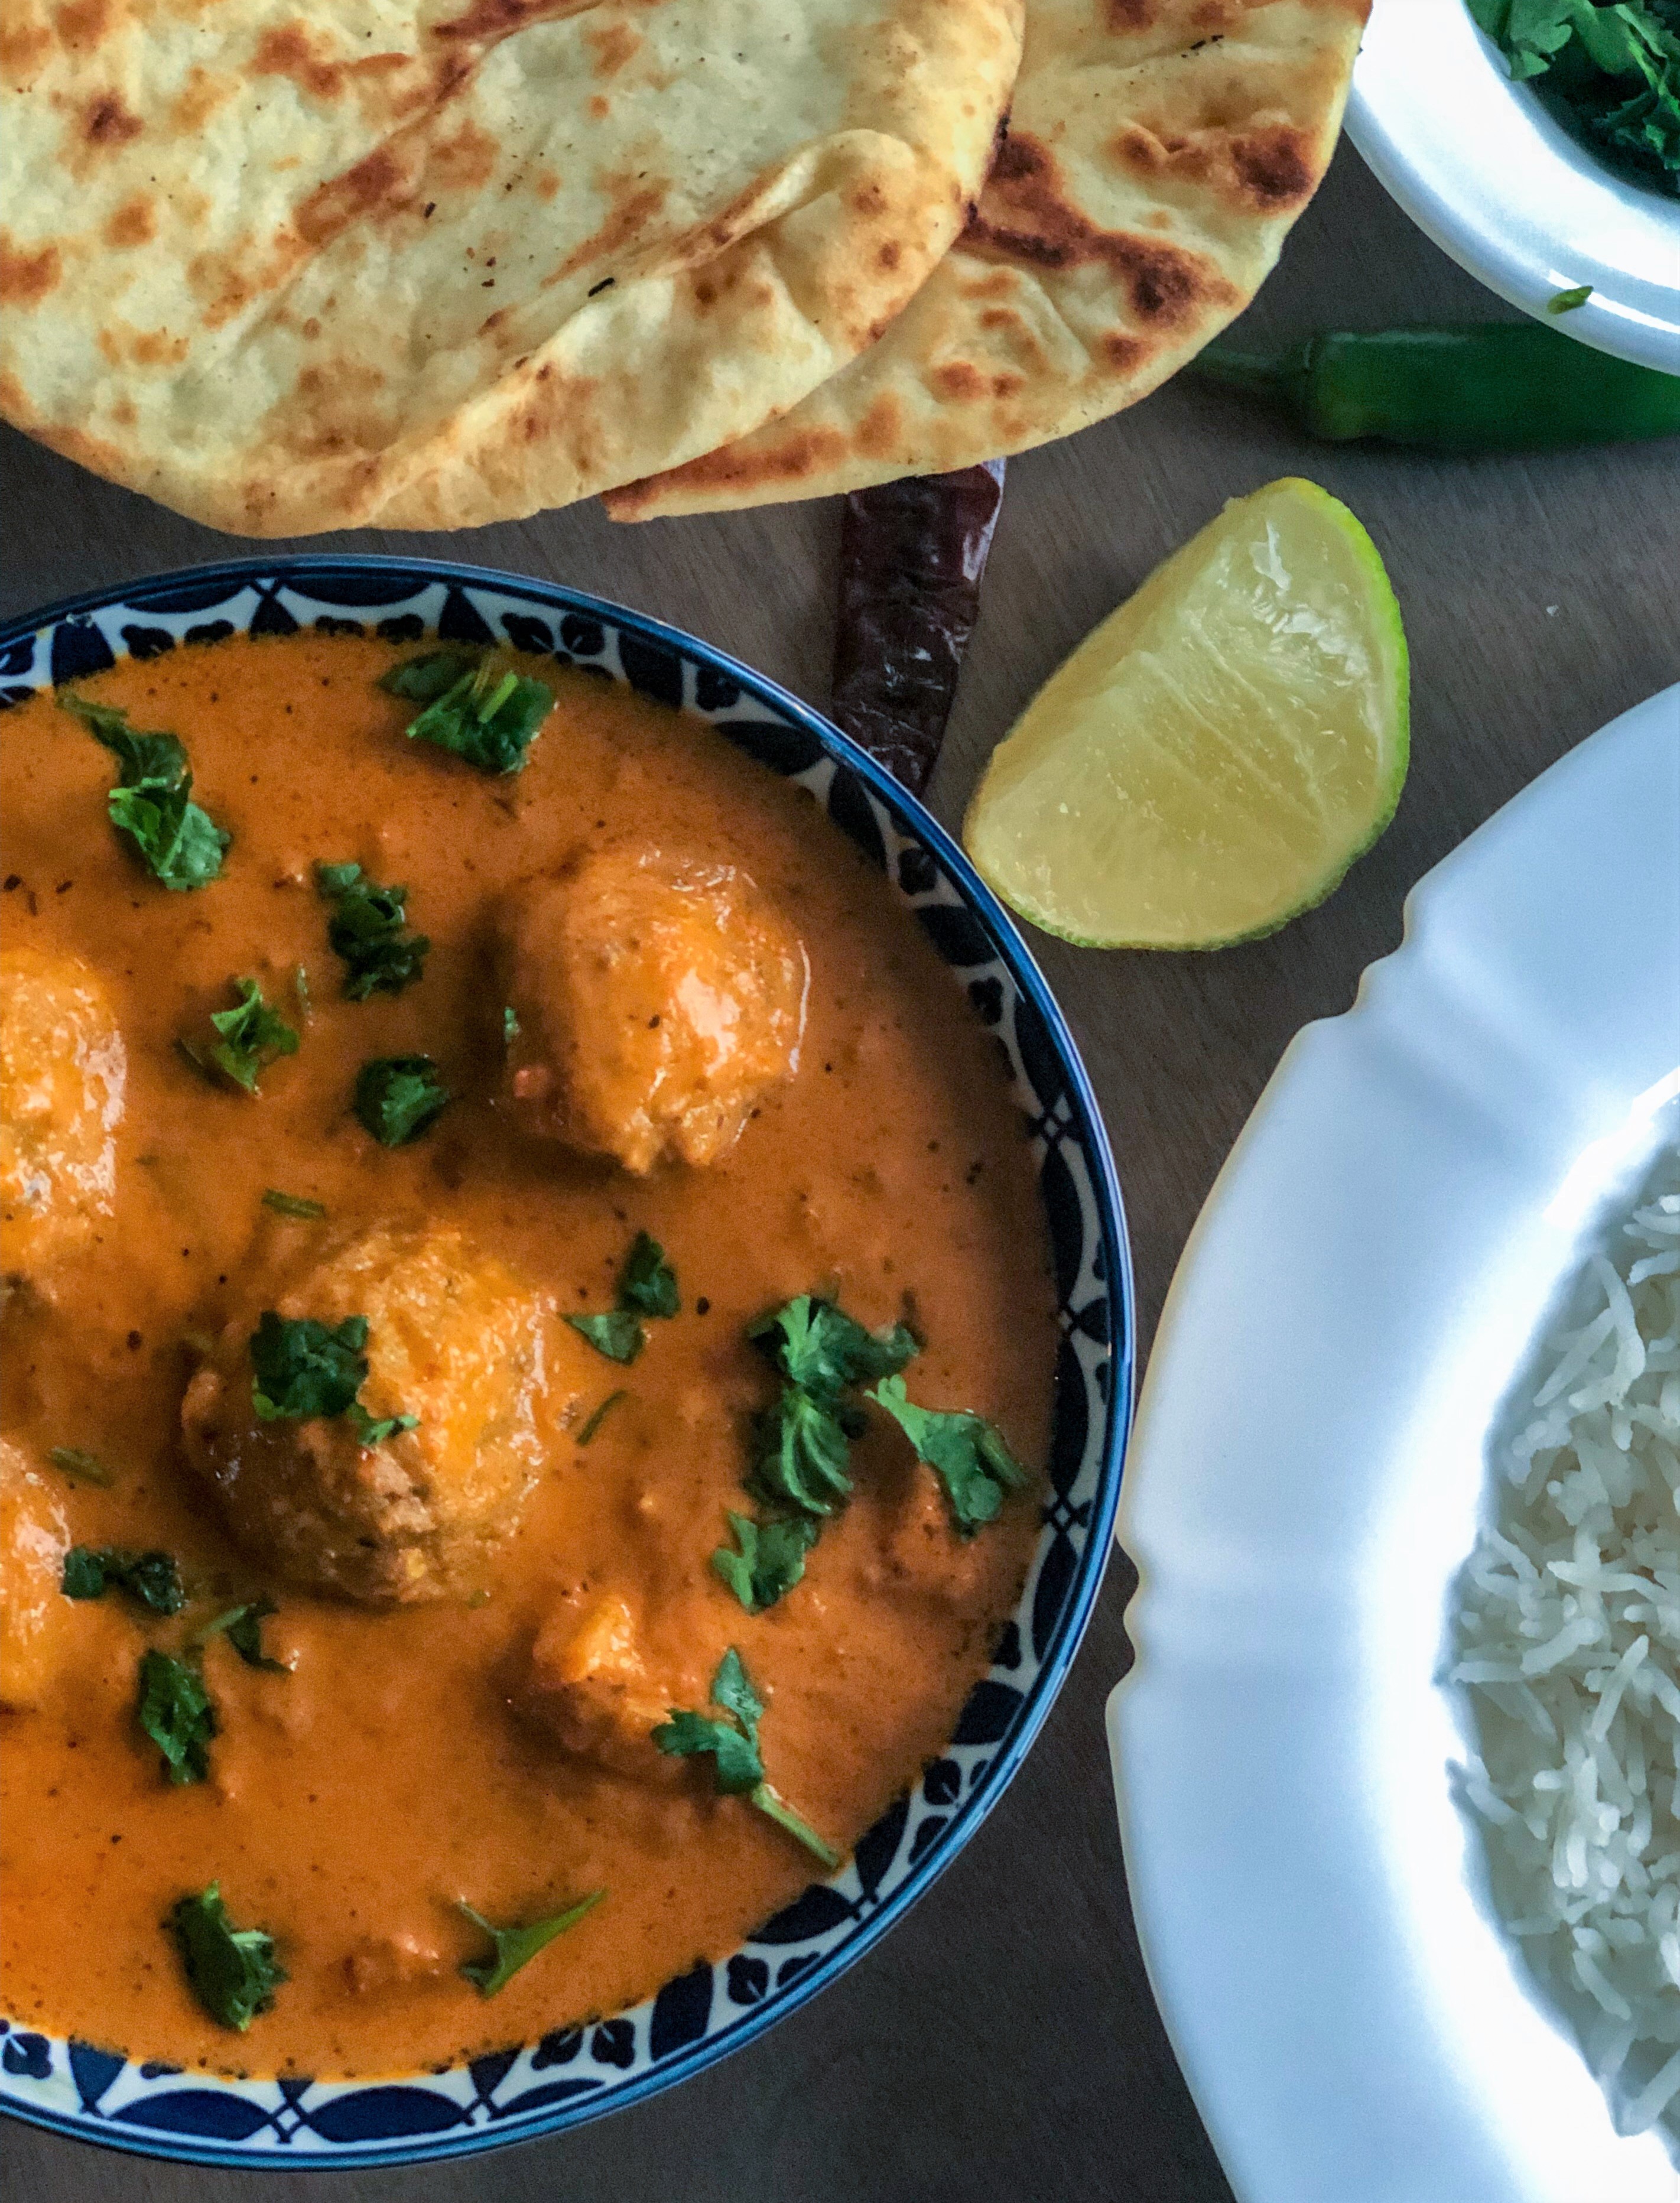 A semi homemade take on traditional Malai Kofta using froze meatless meatballs. Weekday fancy dinner solved. #recipes #easyrecipes#indianfood #curry